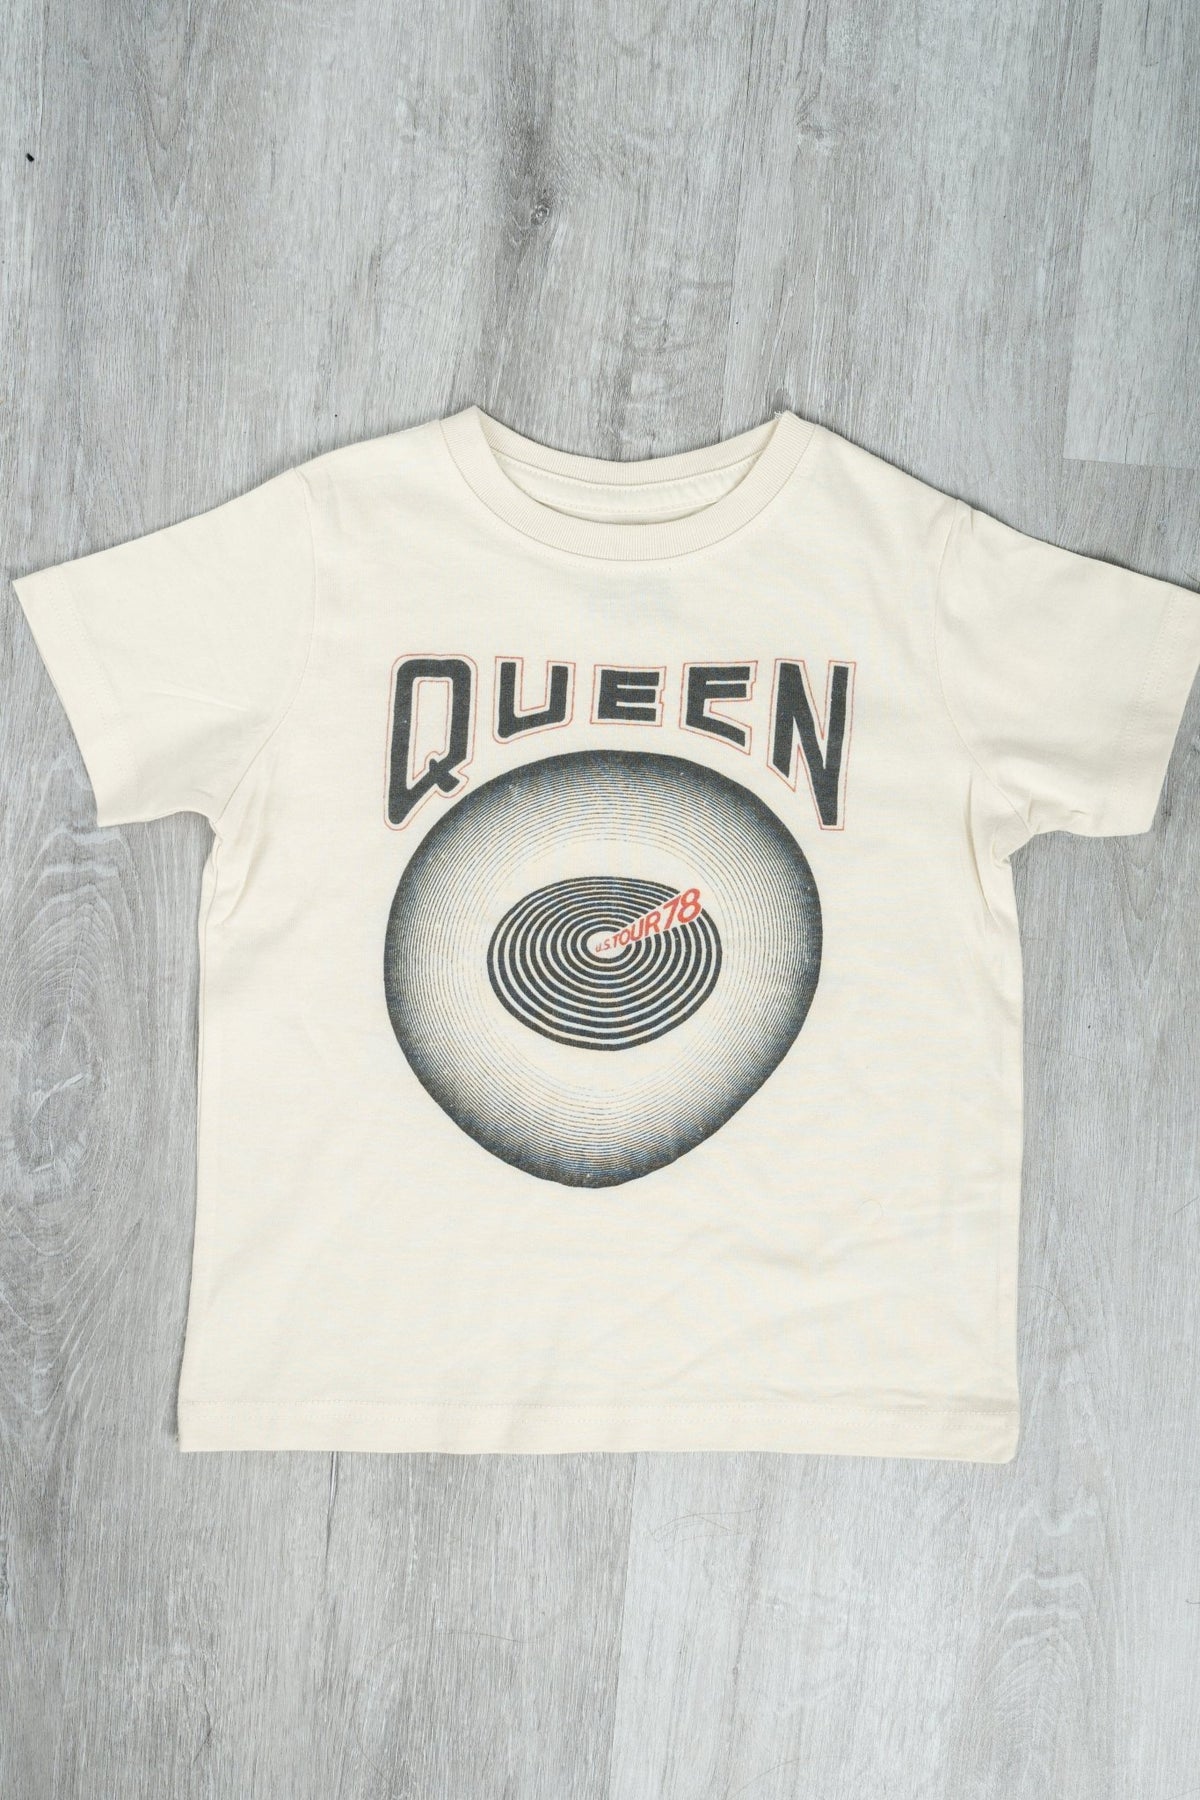 KIDS Queen jazz tour tee oatmeal - Trendy Band T-Shirts and Sweatshirts at Lush Fashion Lounge Boutique in Oklahoma City